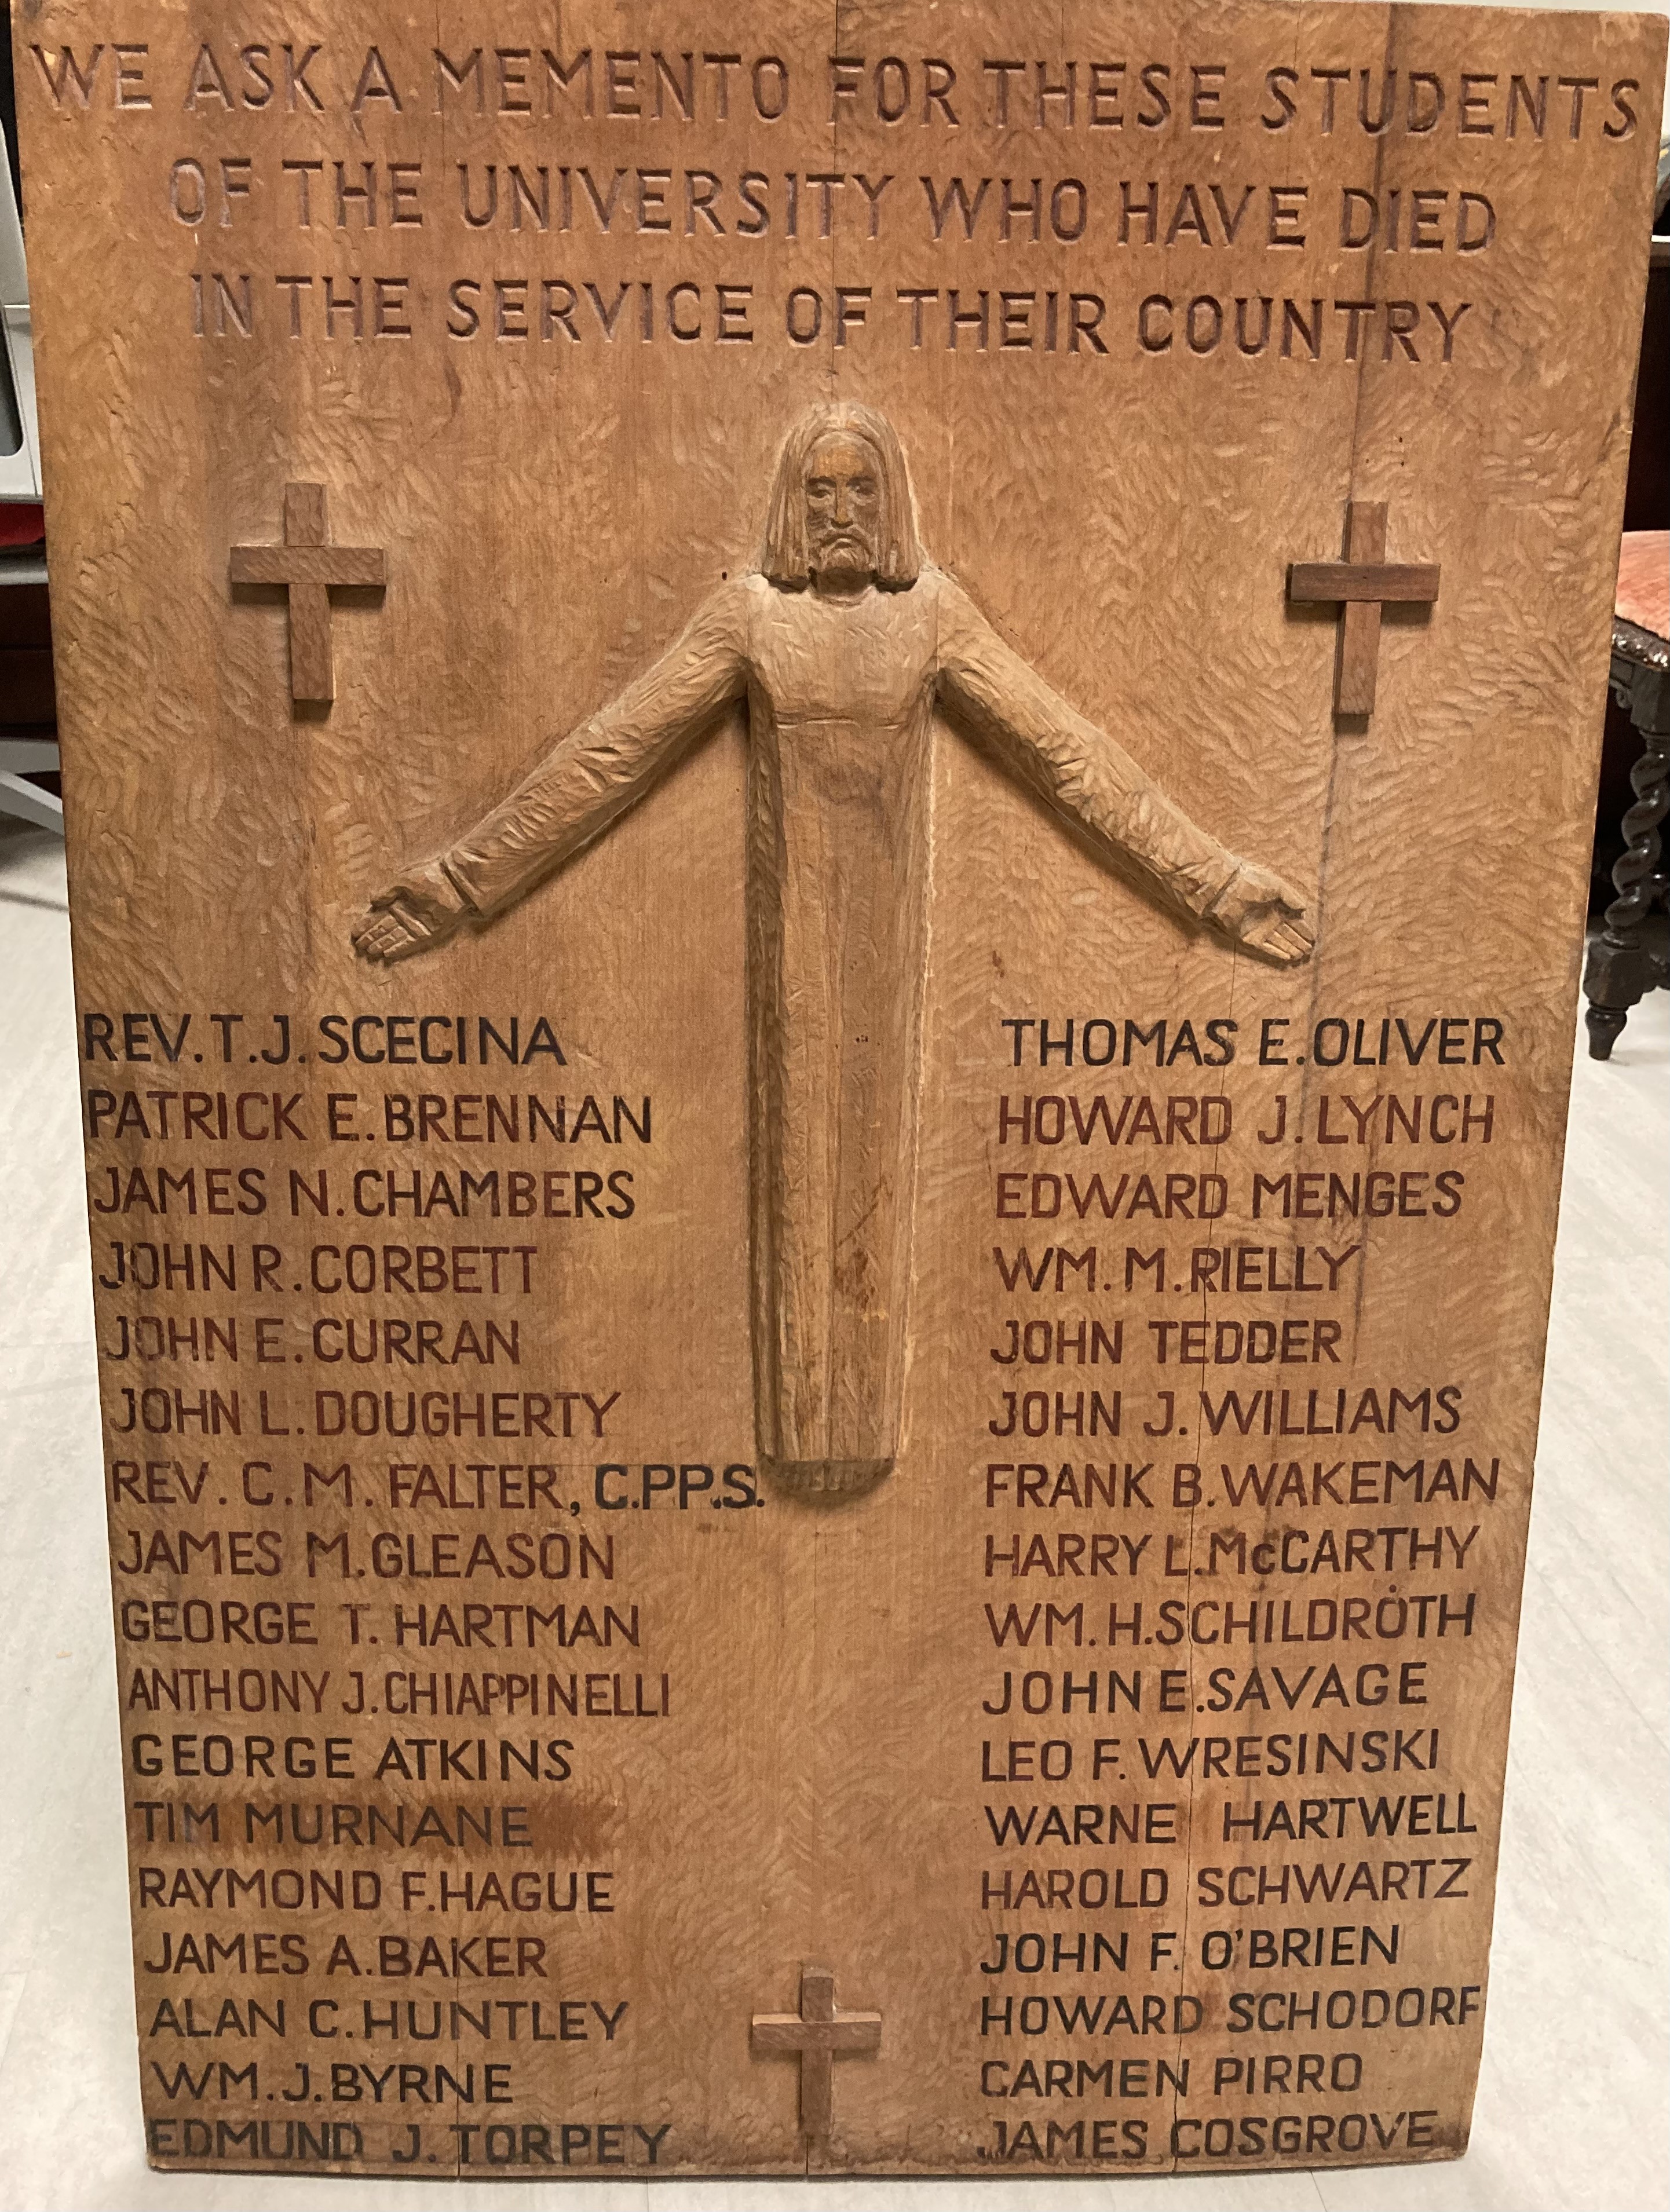 Commemorative plaque dedicated to CUA alumni who gave their lives in WWII